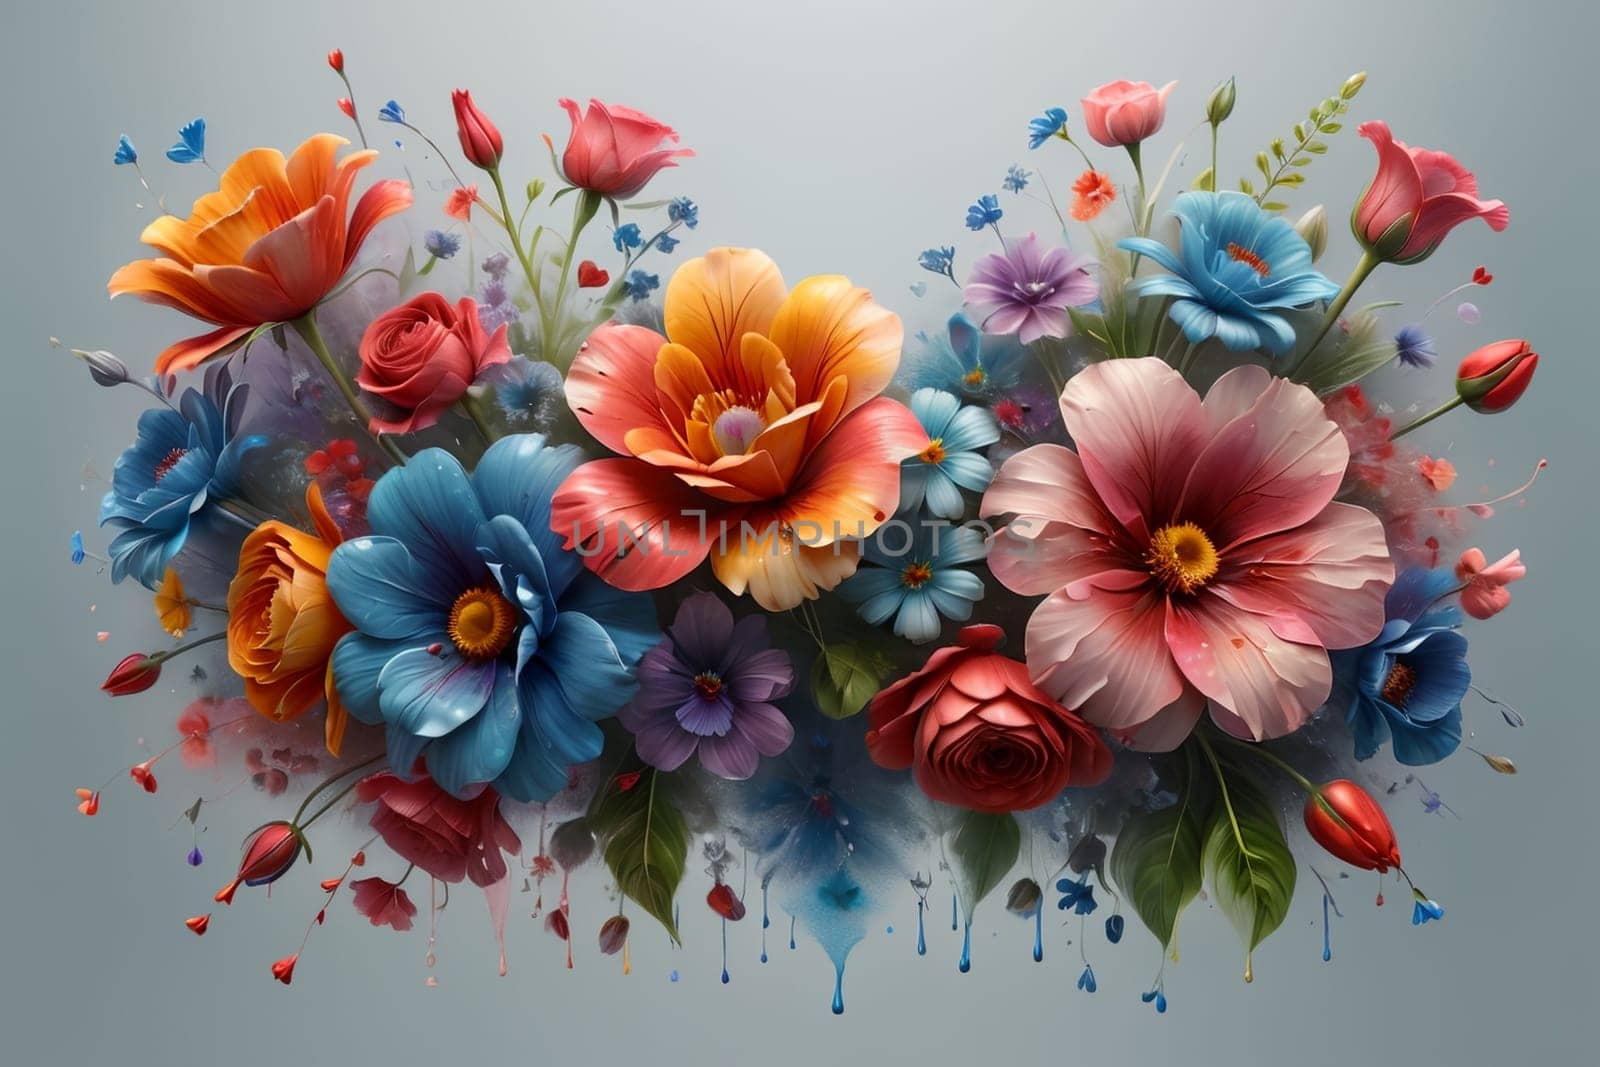 bouquet of bright multi-colored flowers isolated on a blue background .